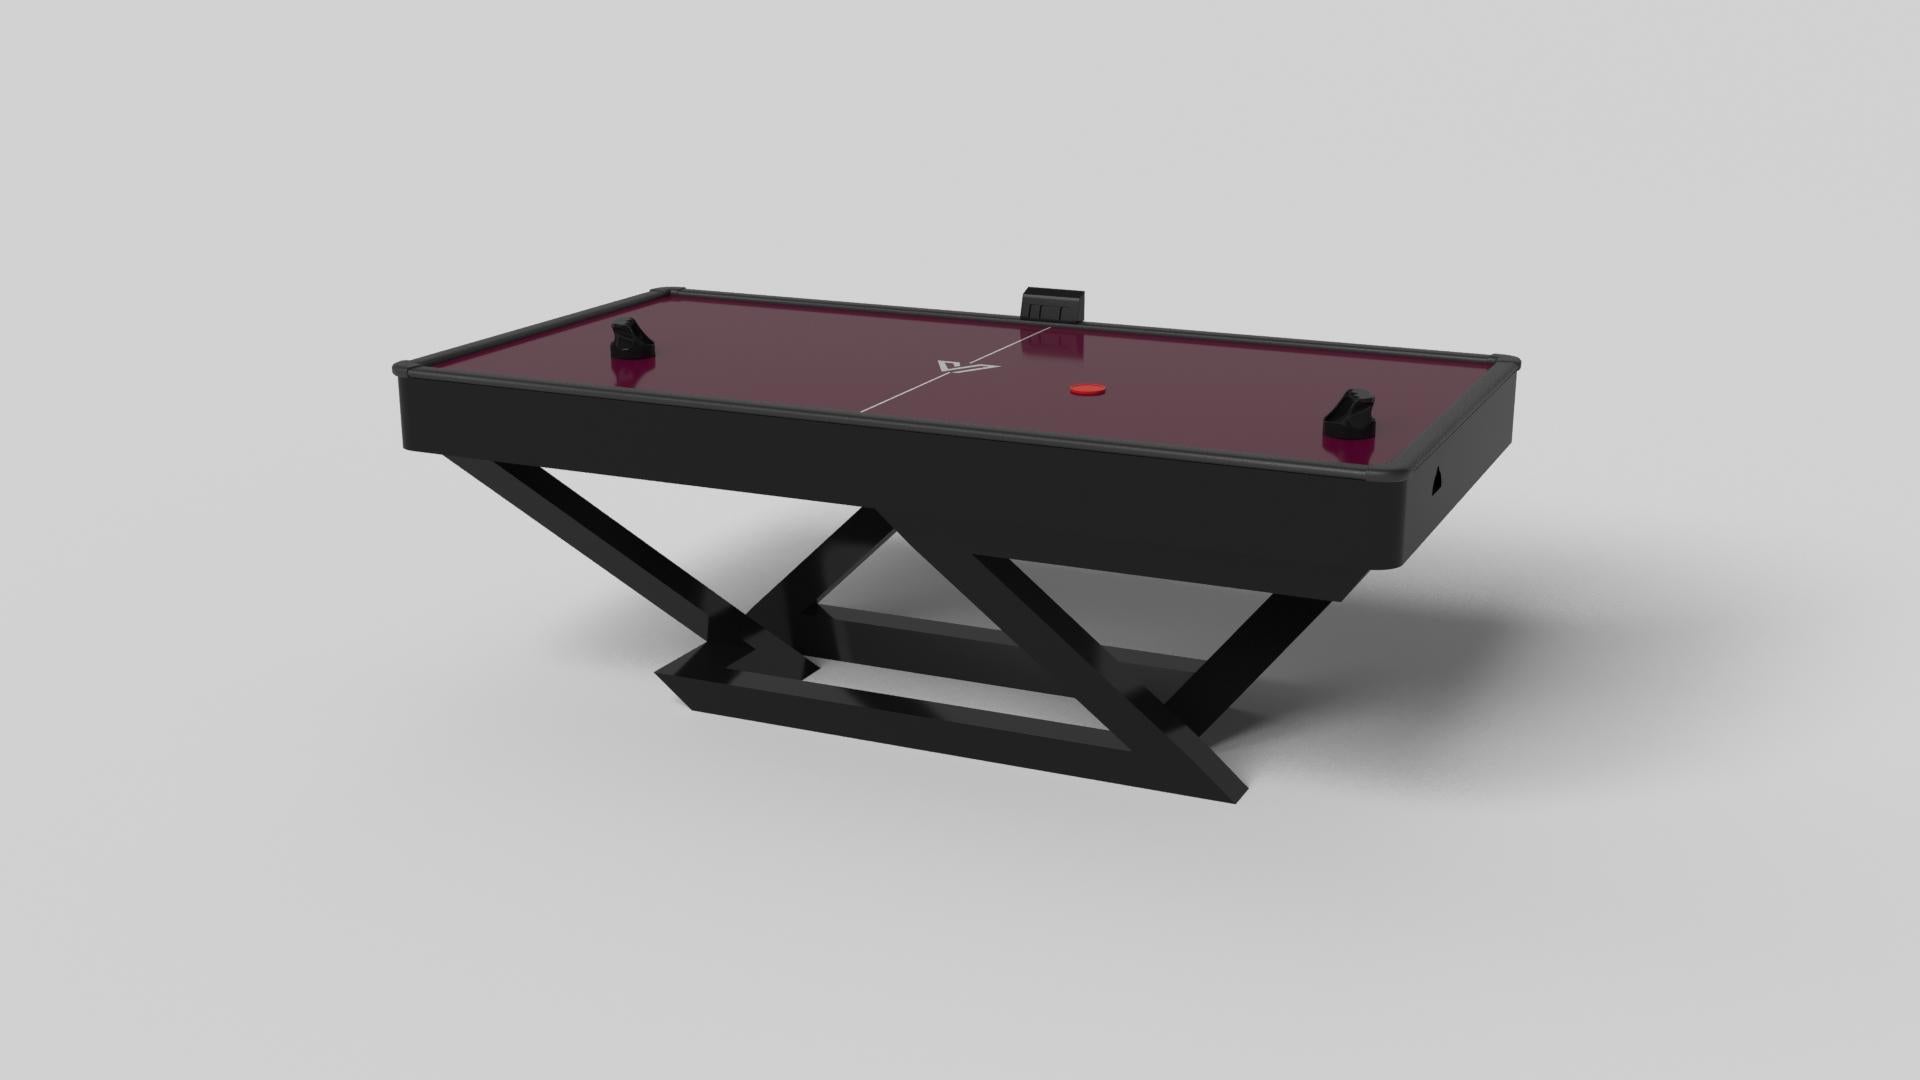 A contemporary composition of clean lines and sleek edges, the Trinity air hockey table in black with red accents is an elegant expression of modern design. Handcrafted and detailed with a regulation top for professional game play, this table offers